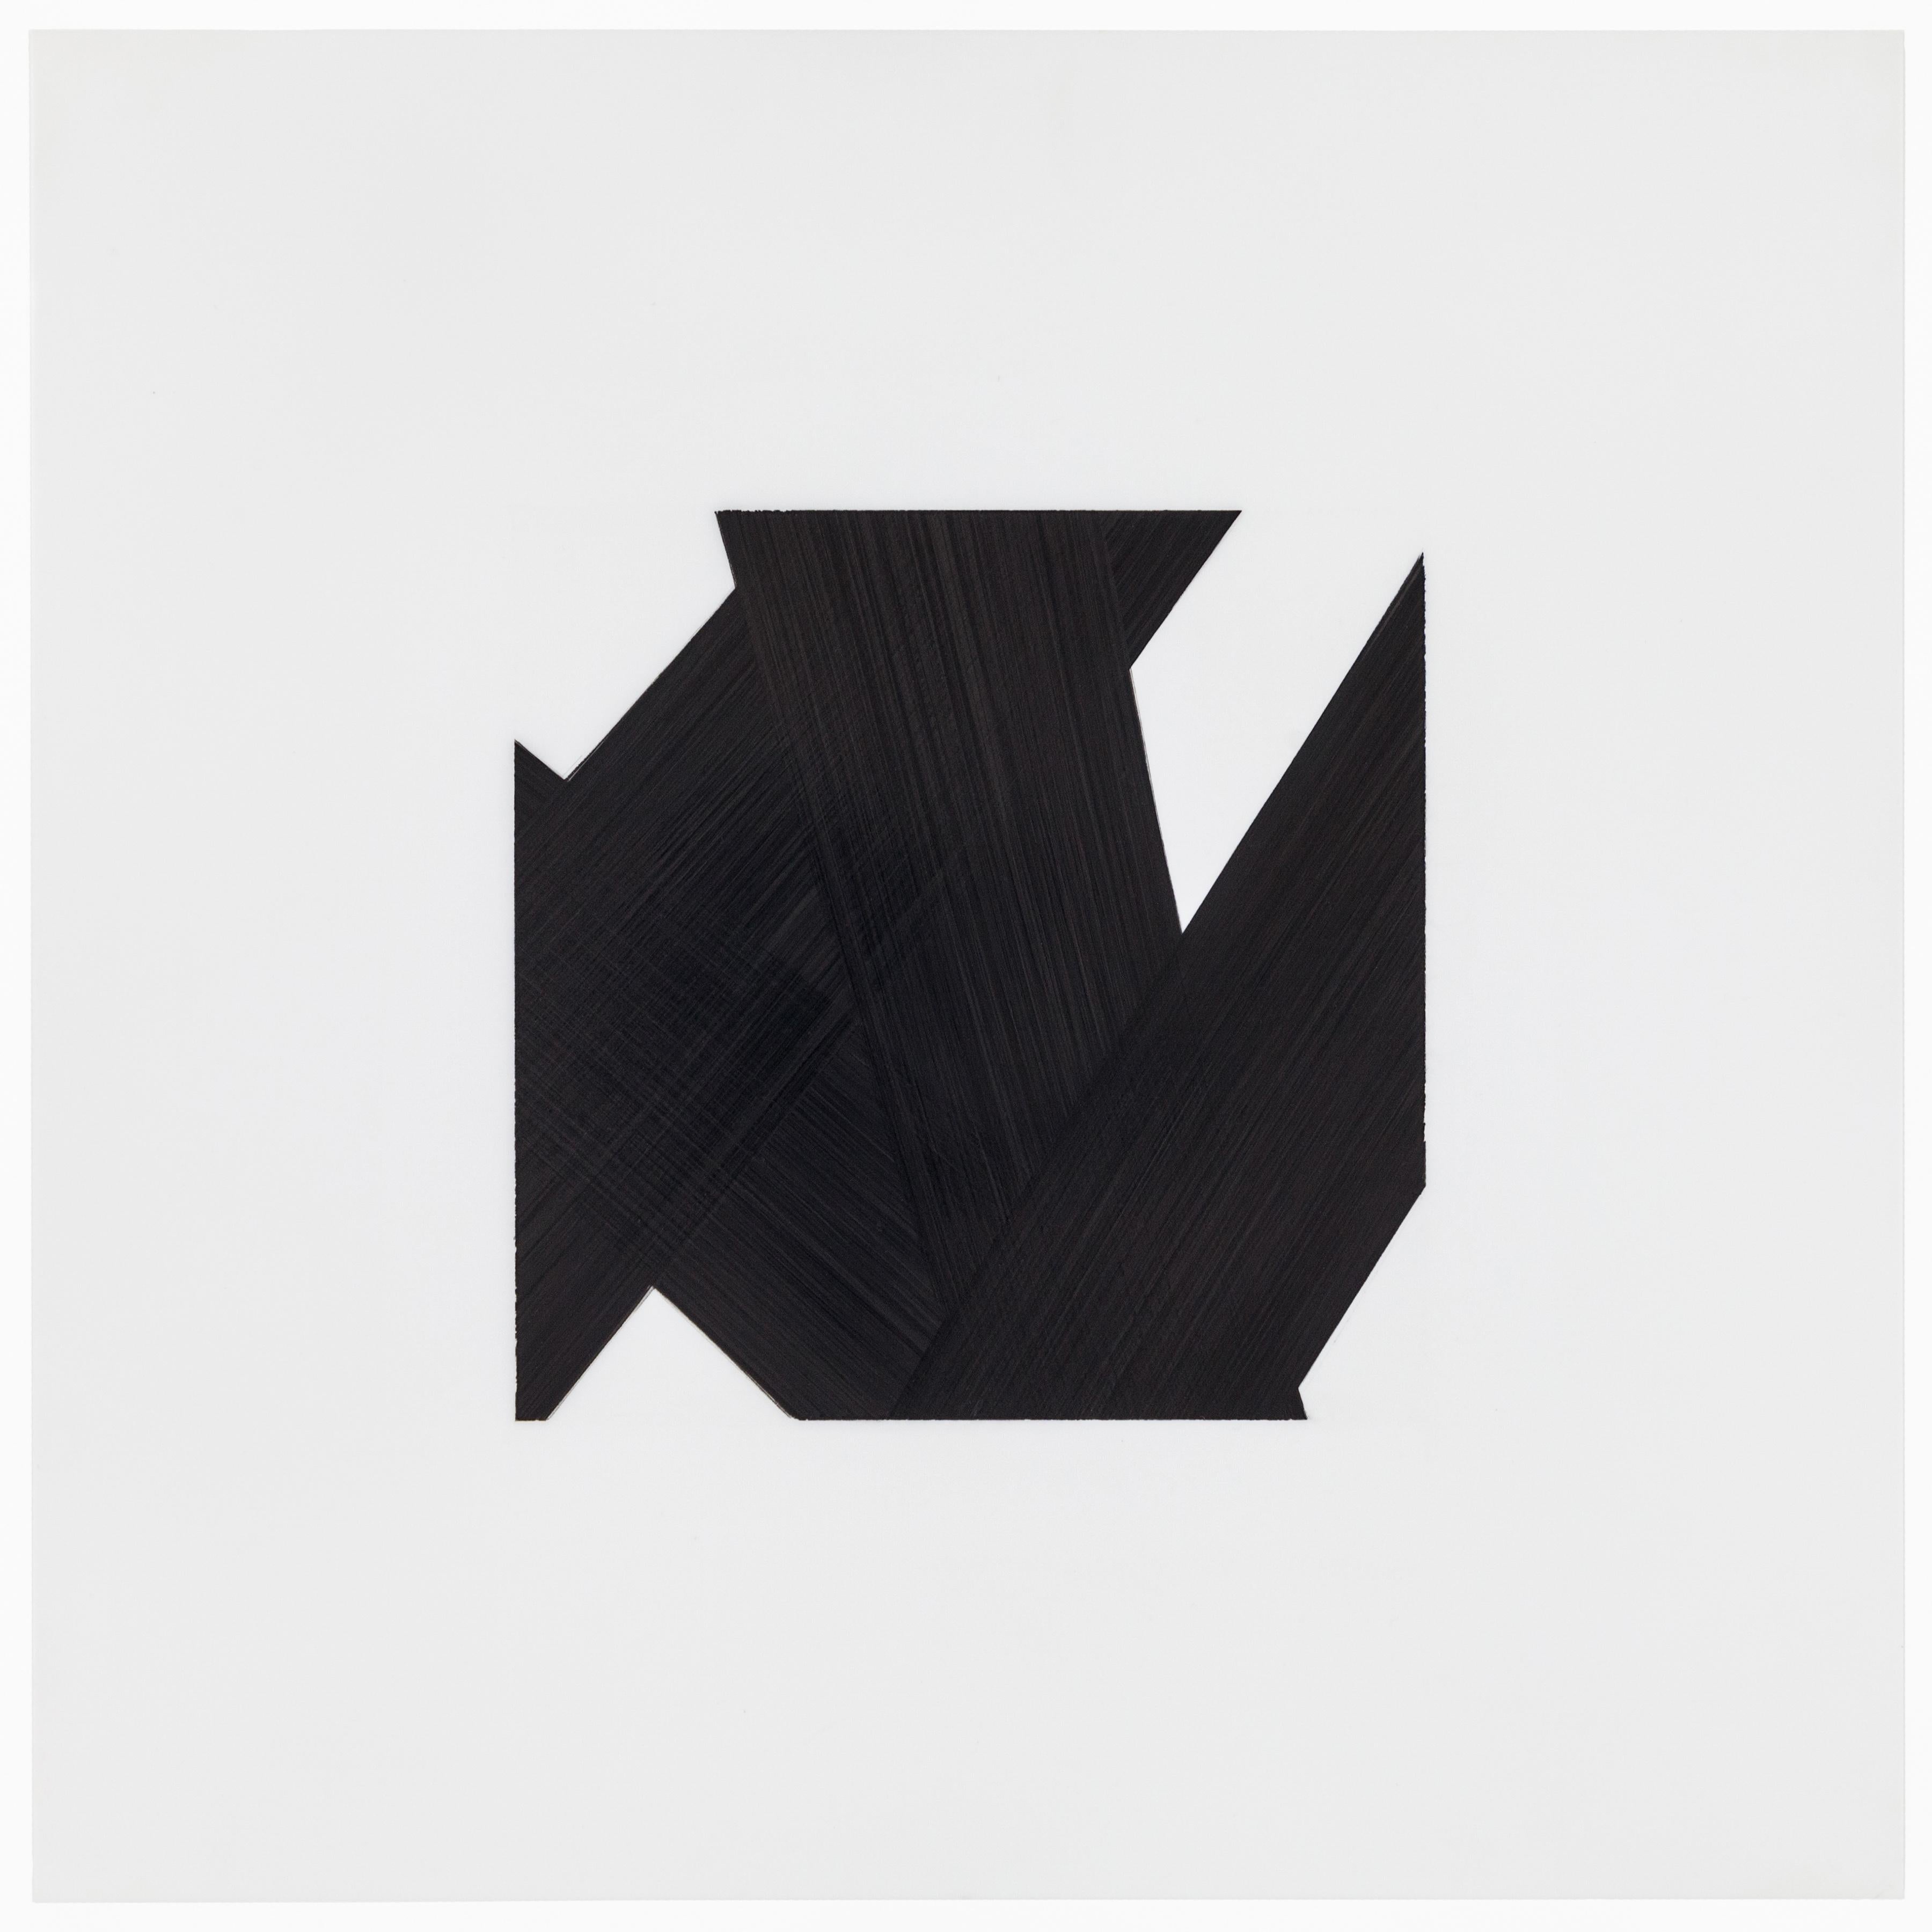 Contemporary New York artist Patrick Carrara's Black Ink on Mylar Drawing Triptych was created in 2016. This is his latest series Appearance, which he started ten years ago and also progresses by number. He uses black ink on Mylar, layering over and